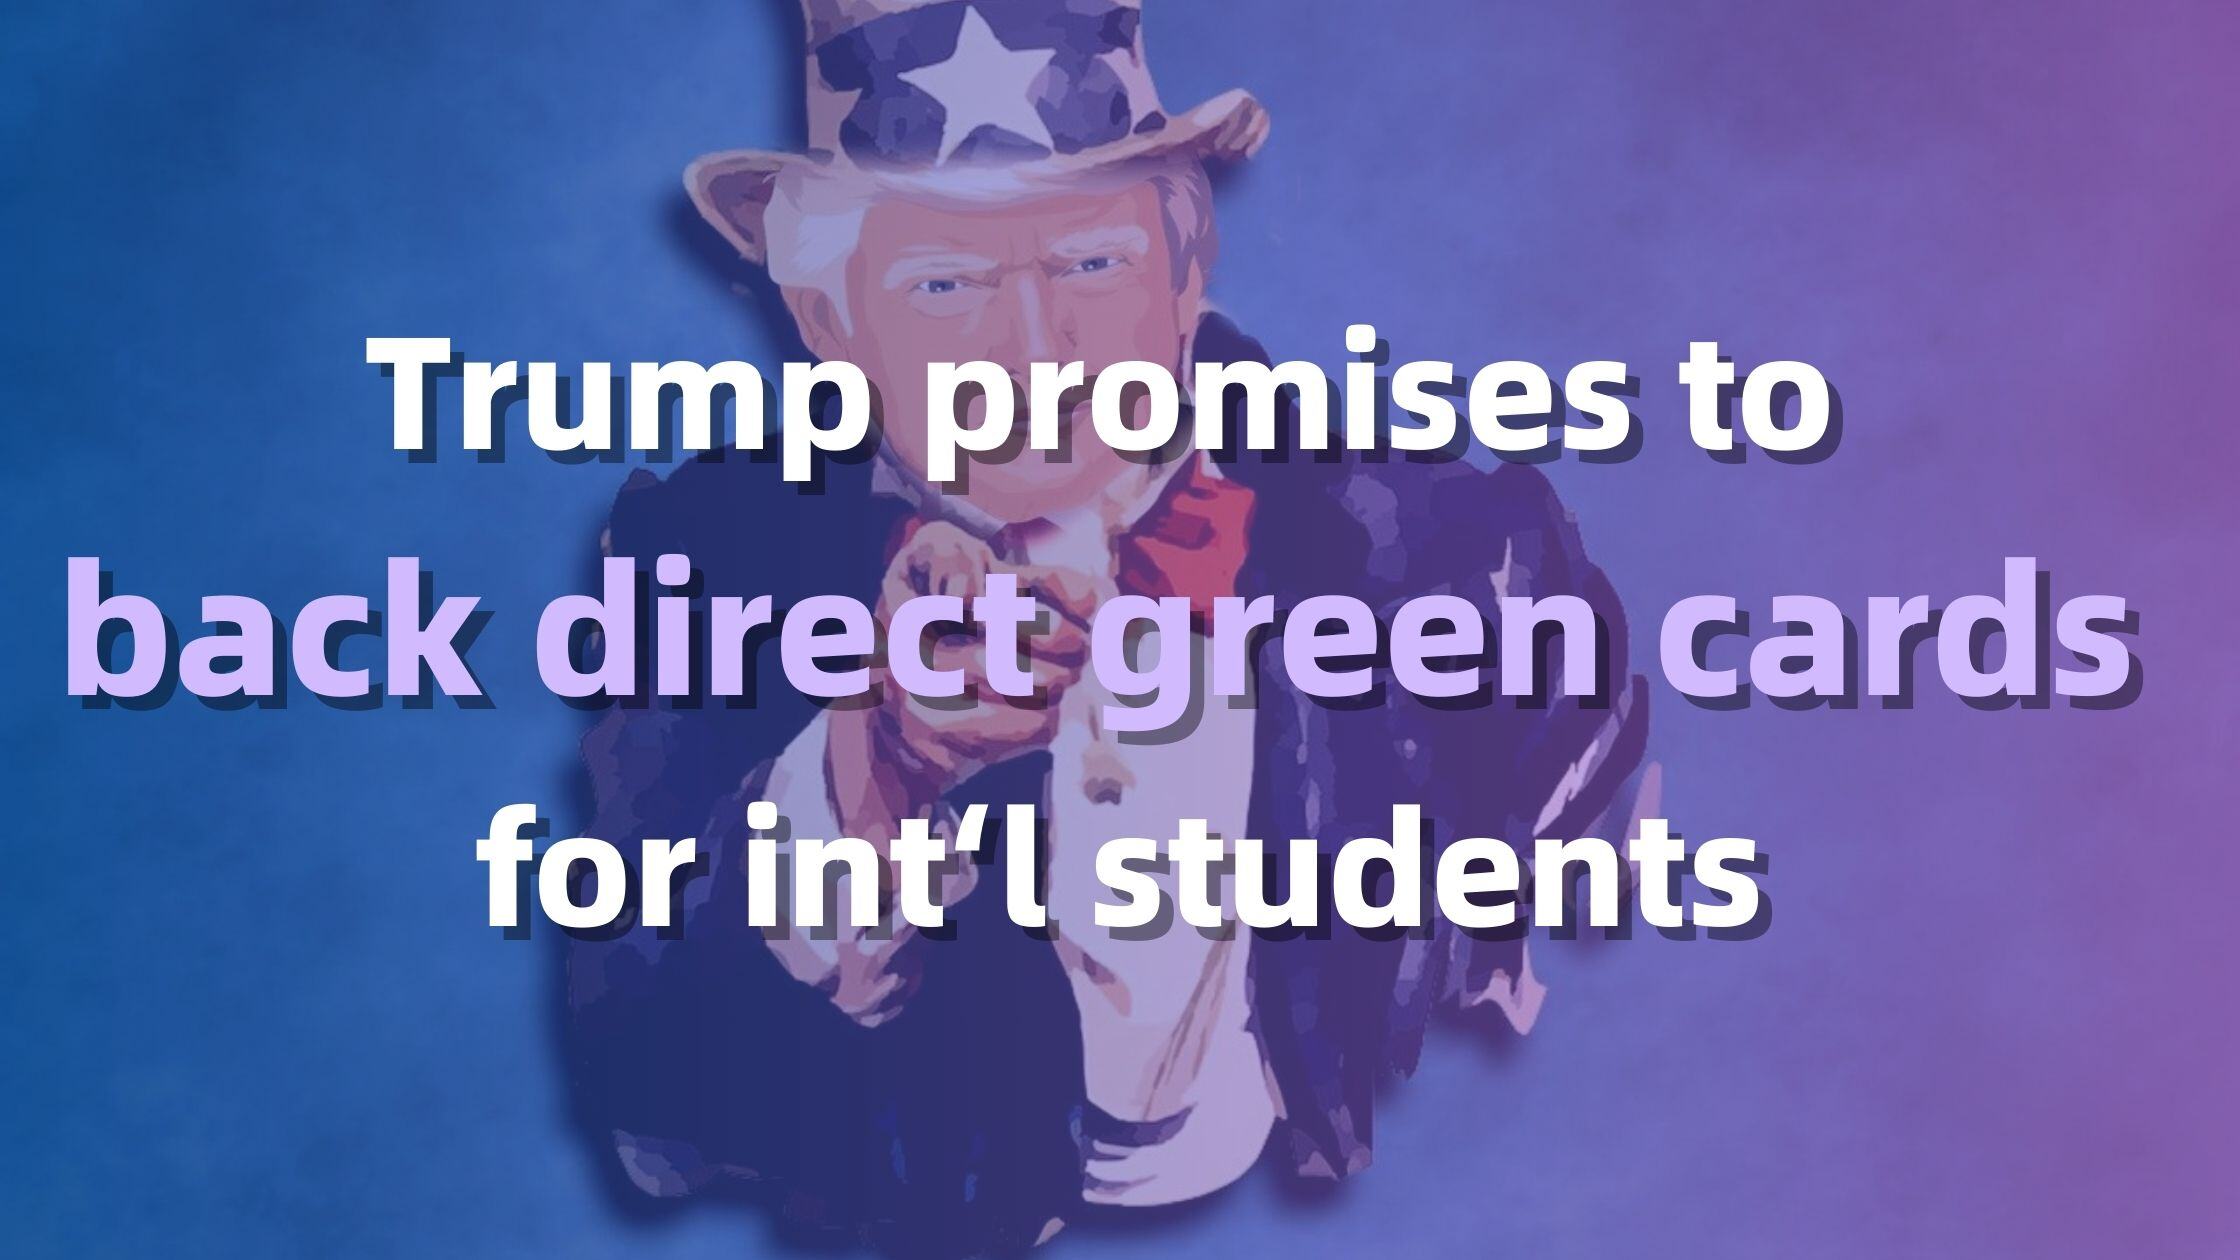 Trump promises to back direct green cards for international students